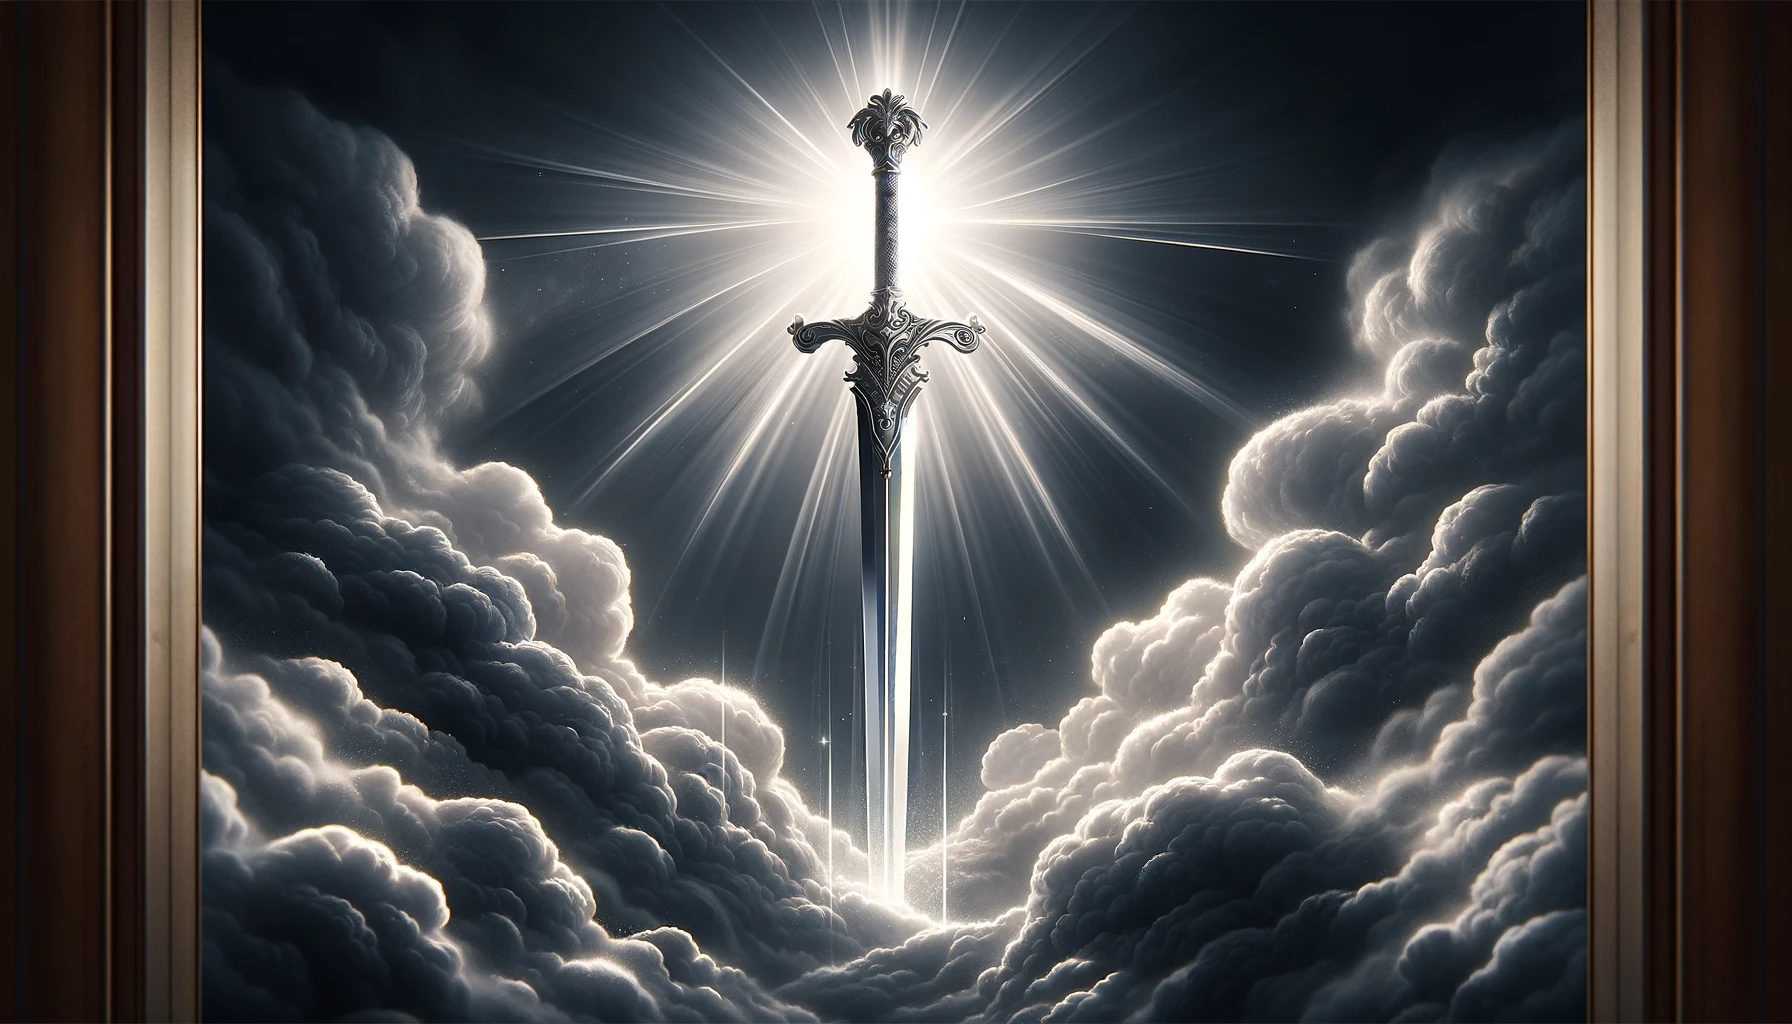 a 169 image featuring the Ace of Swords from the Tarot The central element should be a gleaming silver sword emerging triumphantly from a dark and stormy cloud The sword should